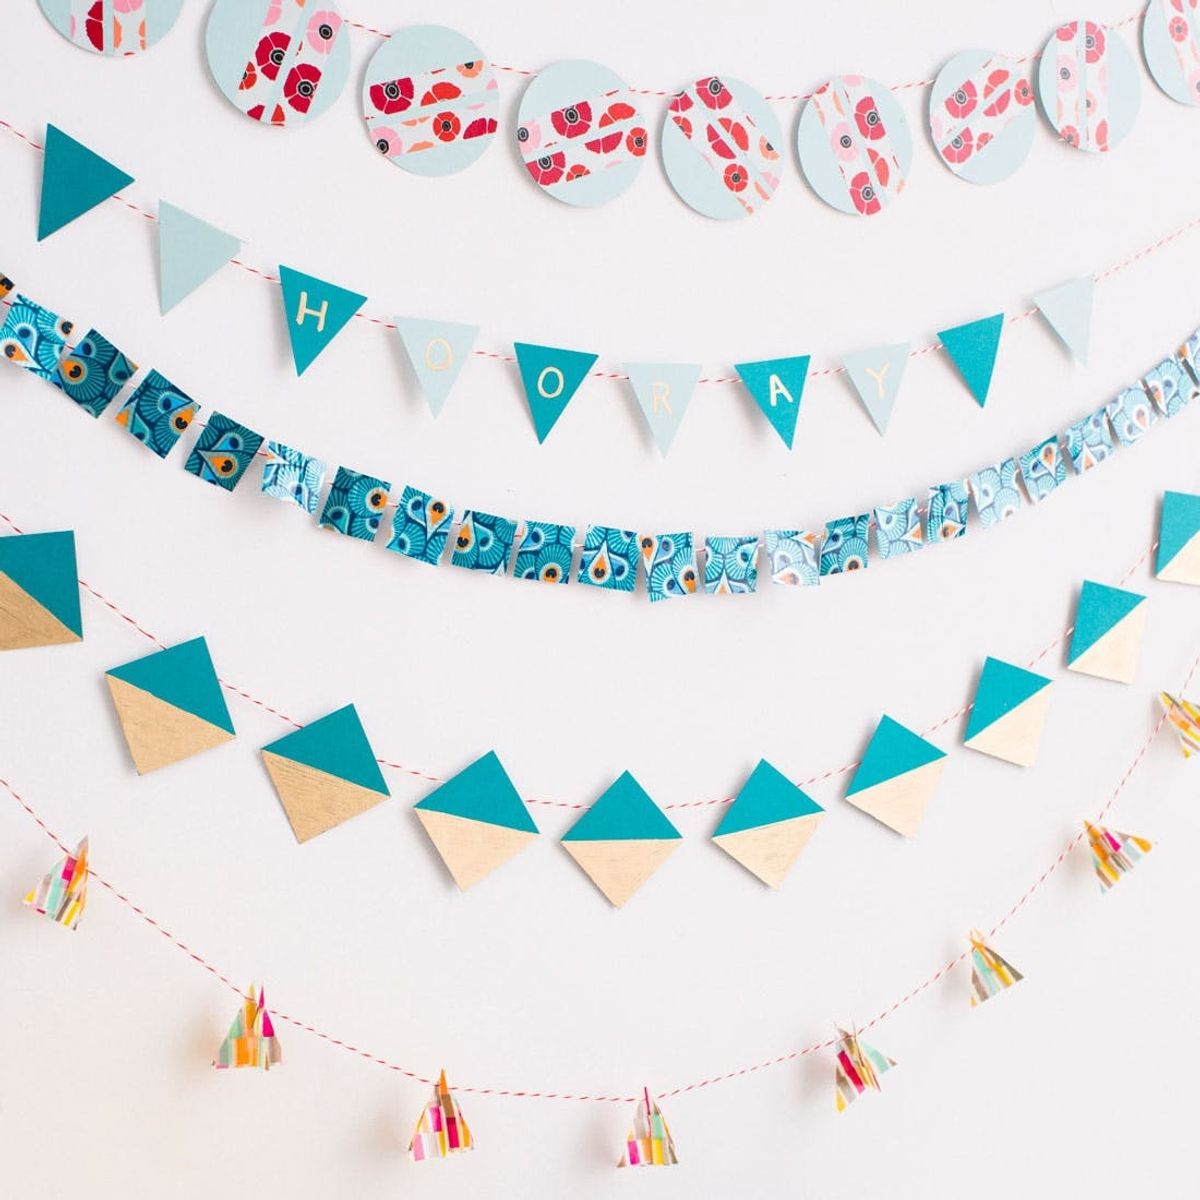 5 Garlands You Can Make in Under 15 Minutes